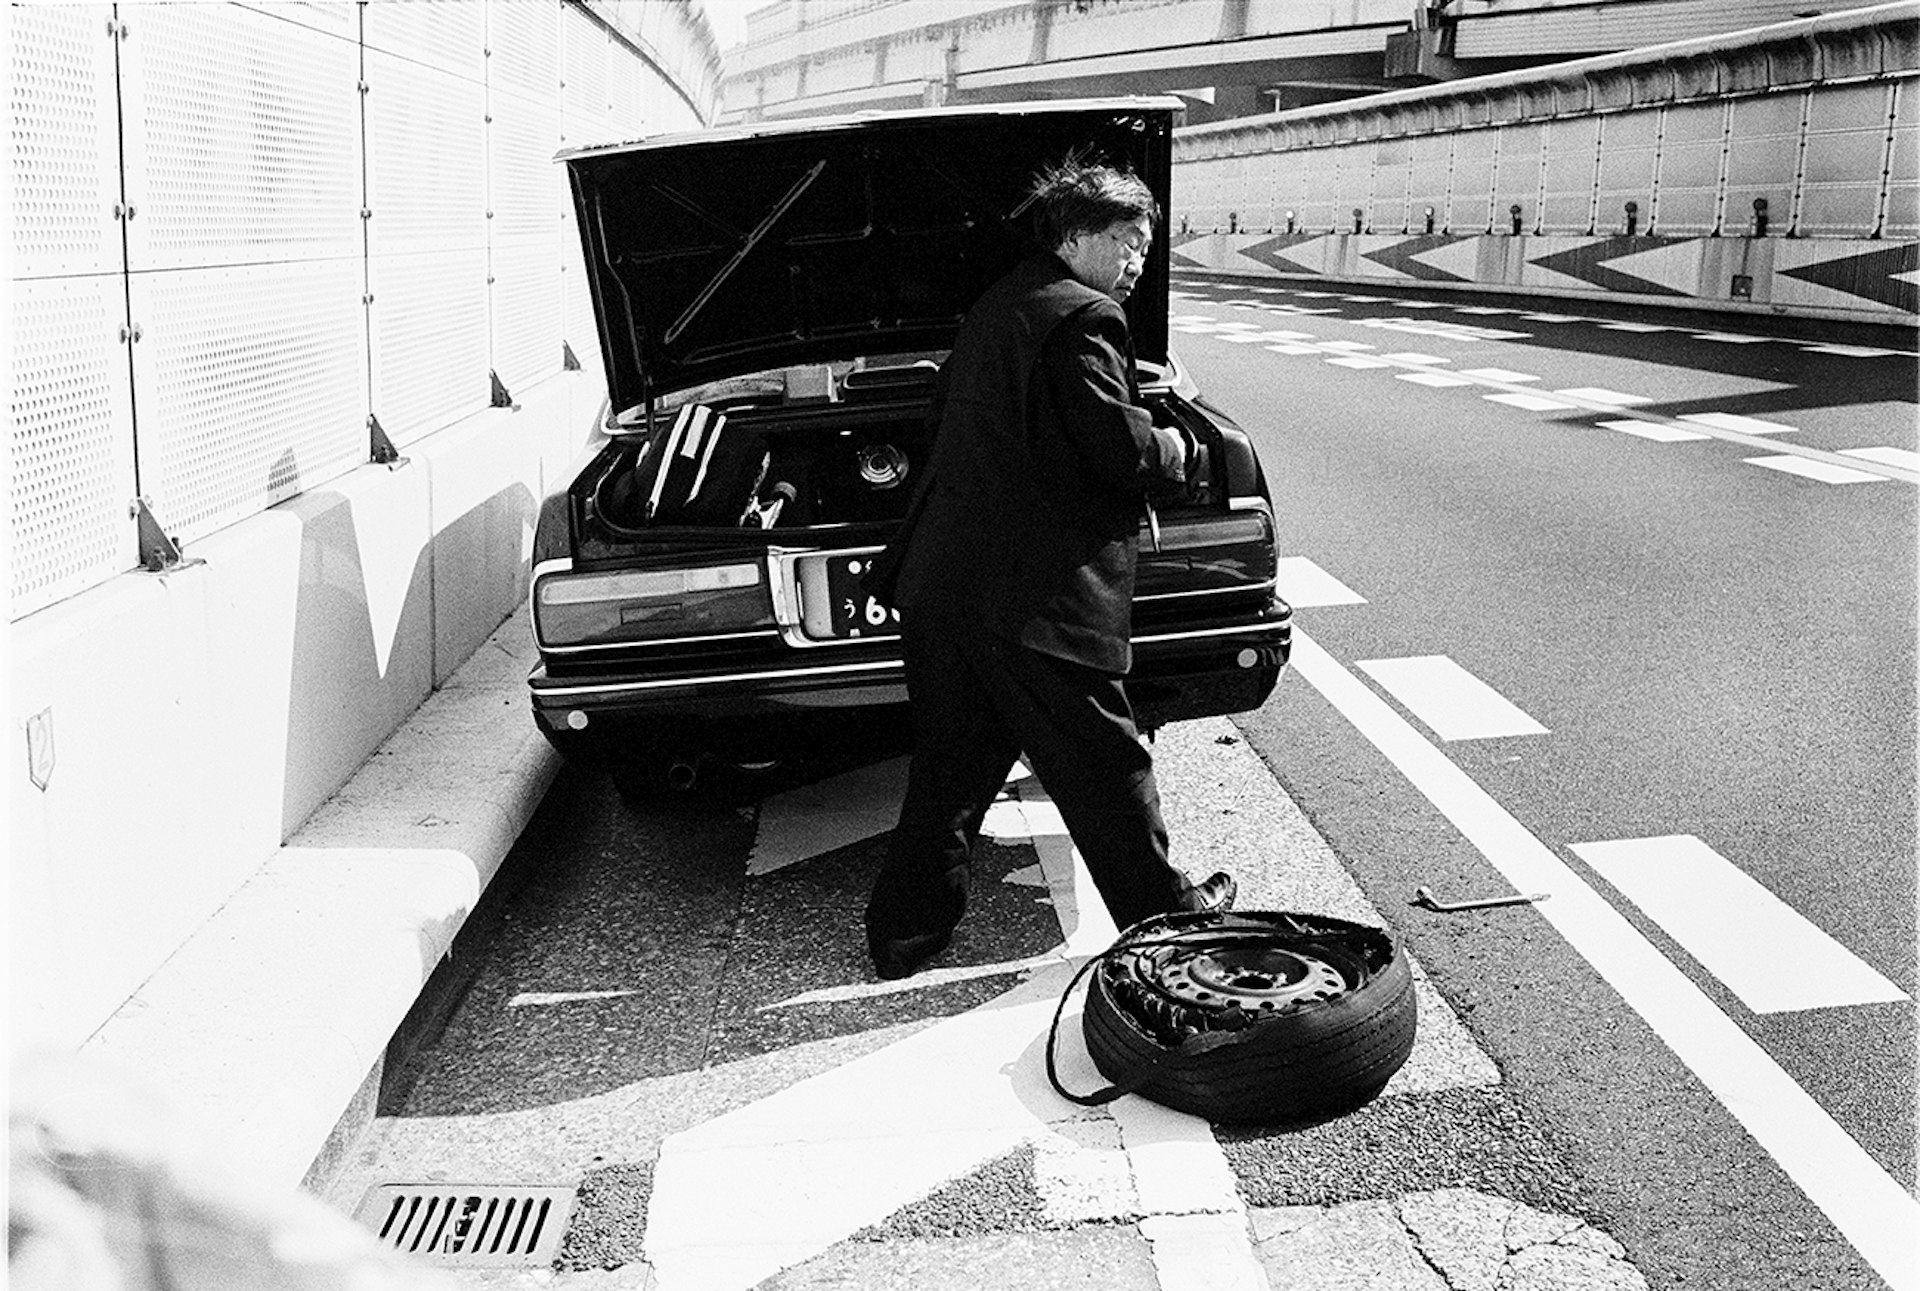 A man in a suit changes the tire of a taxi parked on the side of the road